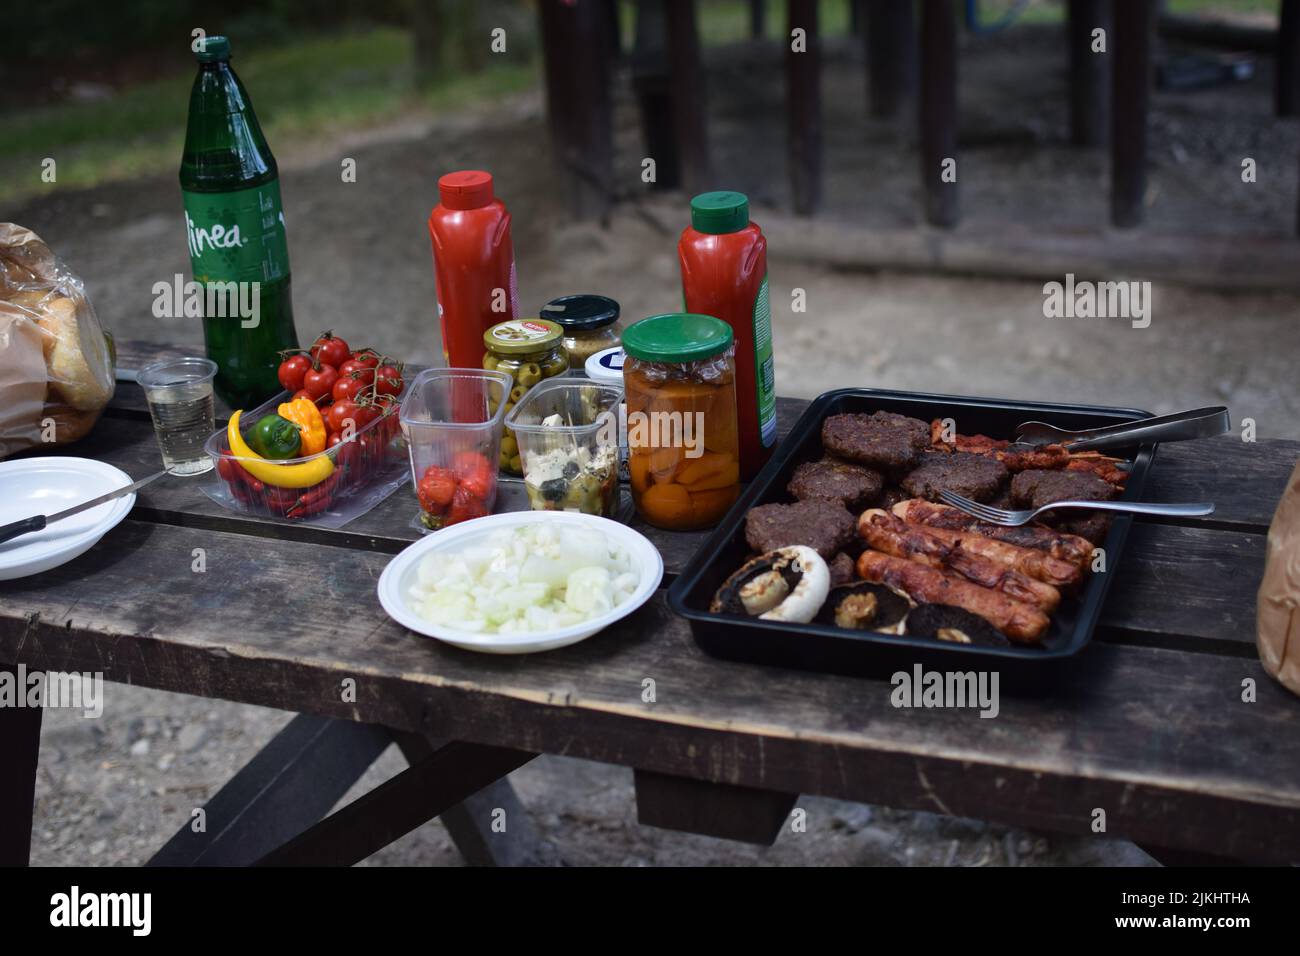 A wooden picnic table with barbecued meats, vegetables, and sauces Stock Photo